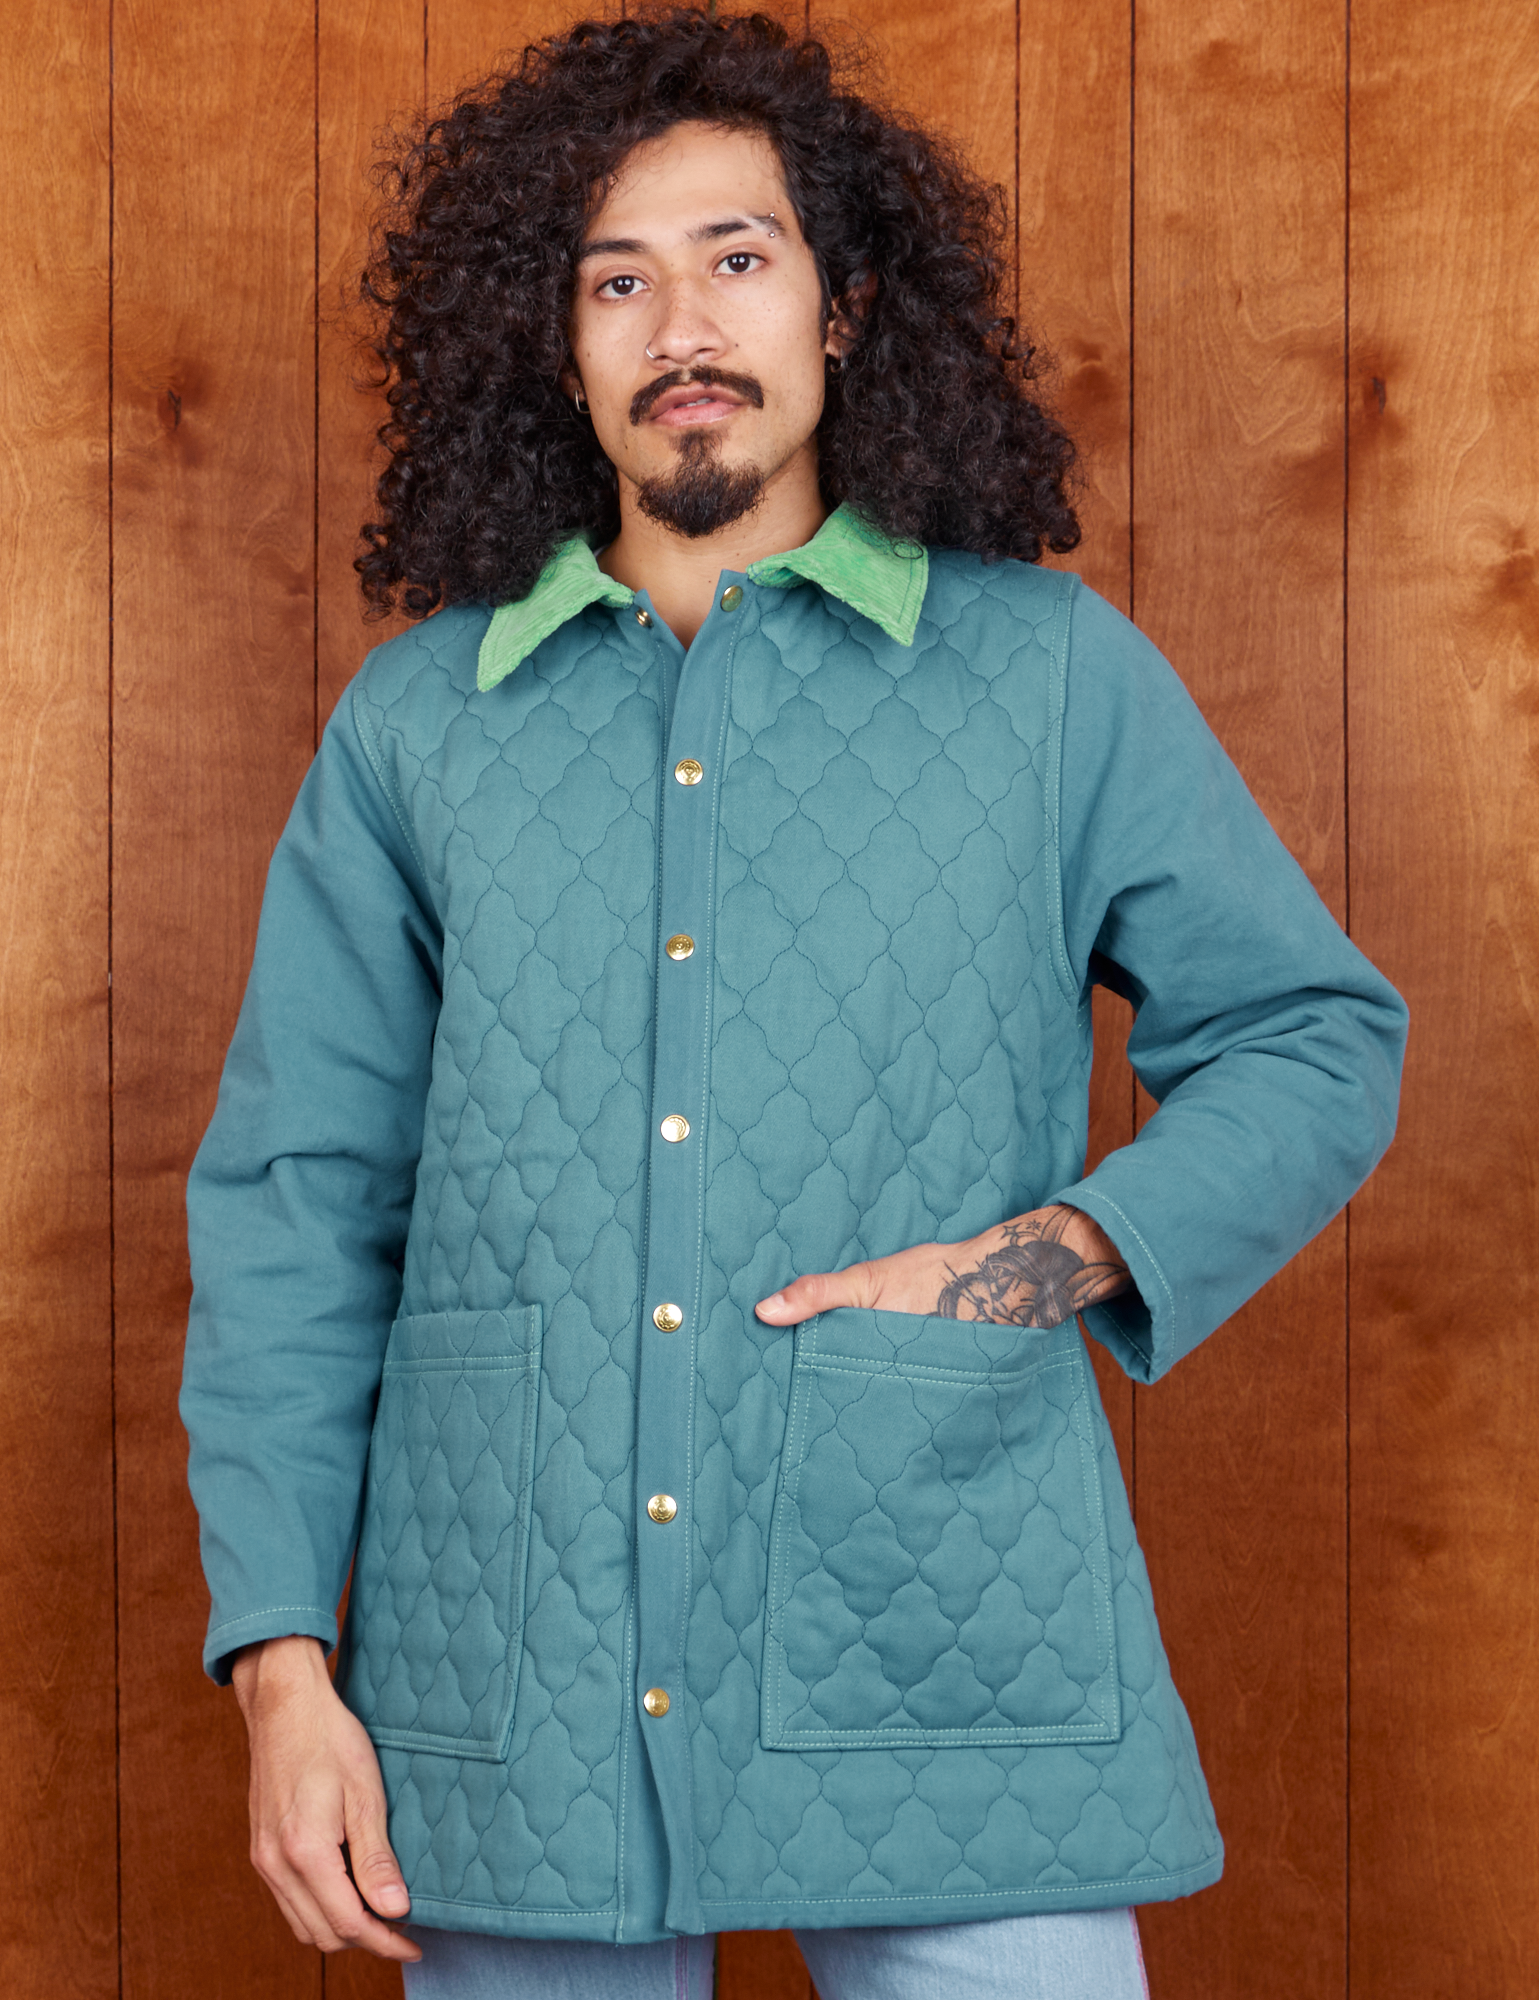 Jesse is wearing a buttoned up Quilted Overcoat in Marine Blue